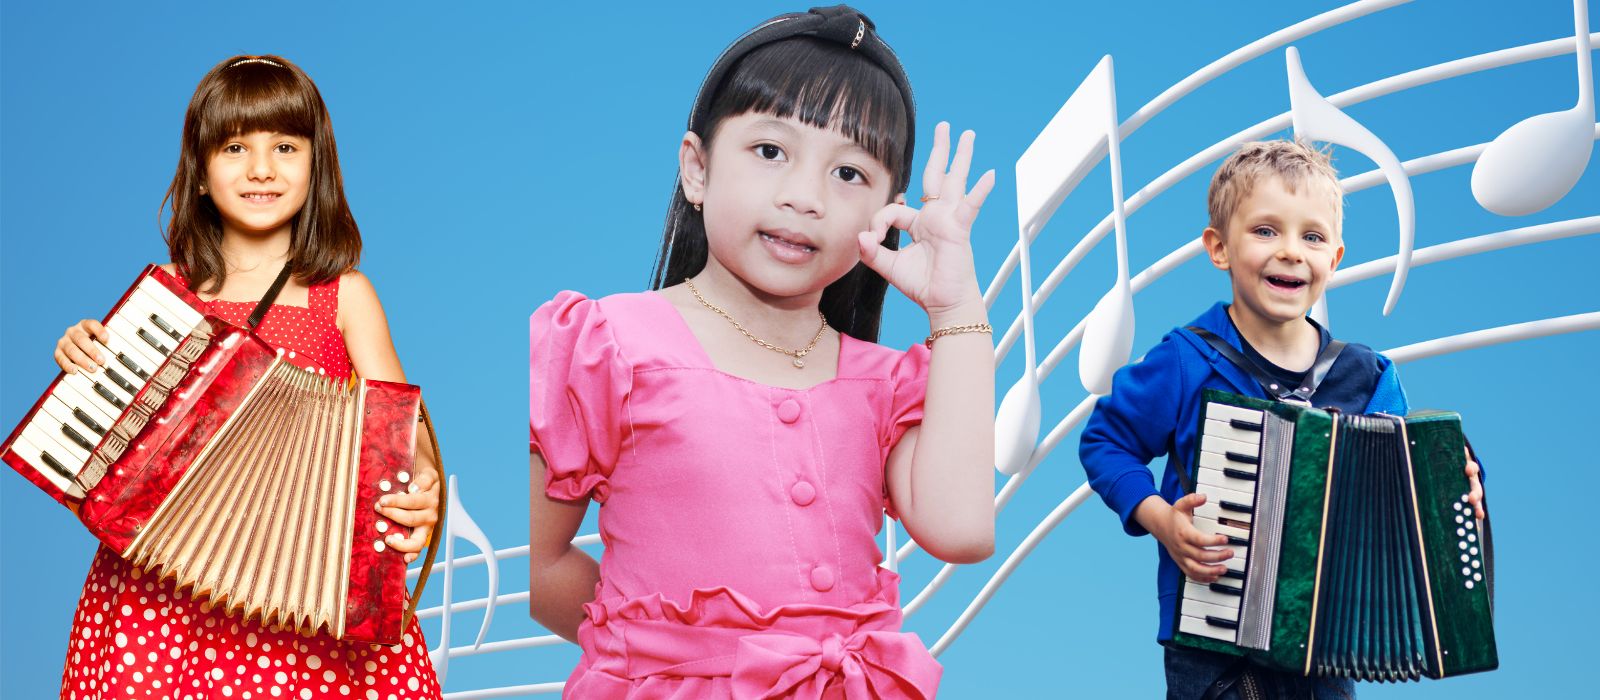 Benefits of toy accordions for children